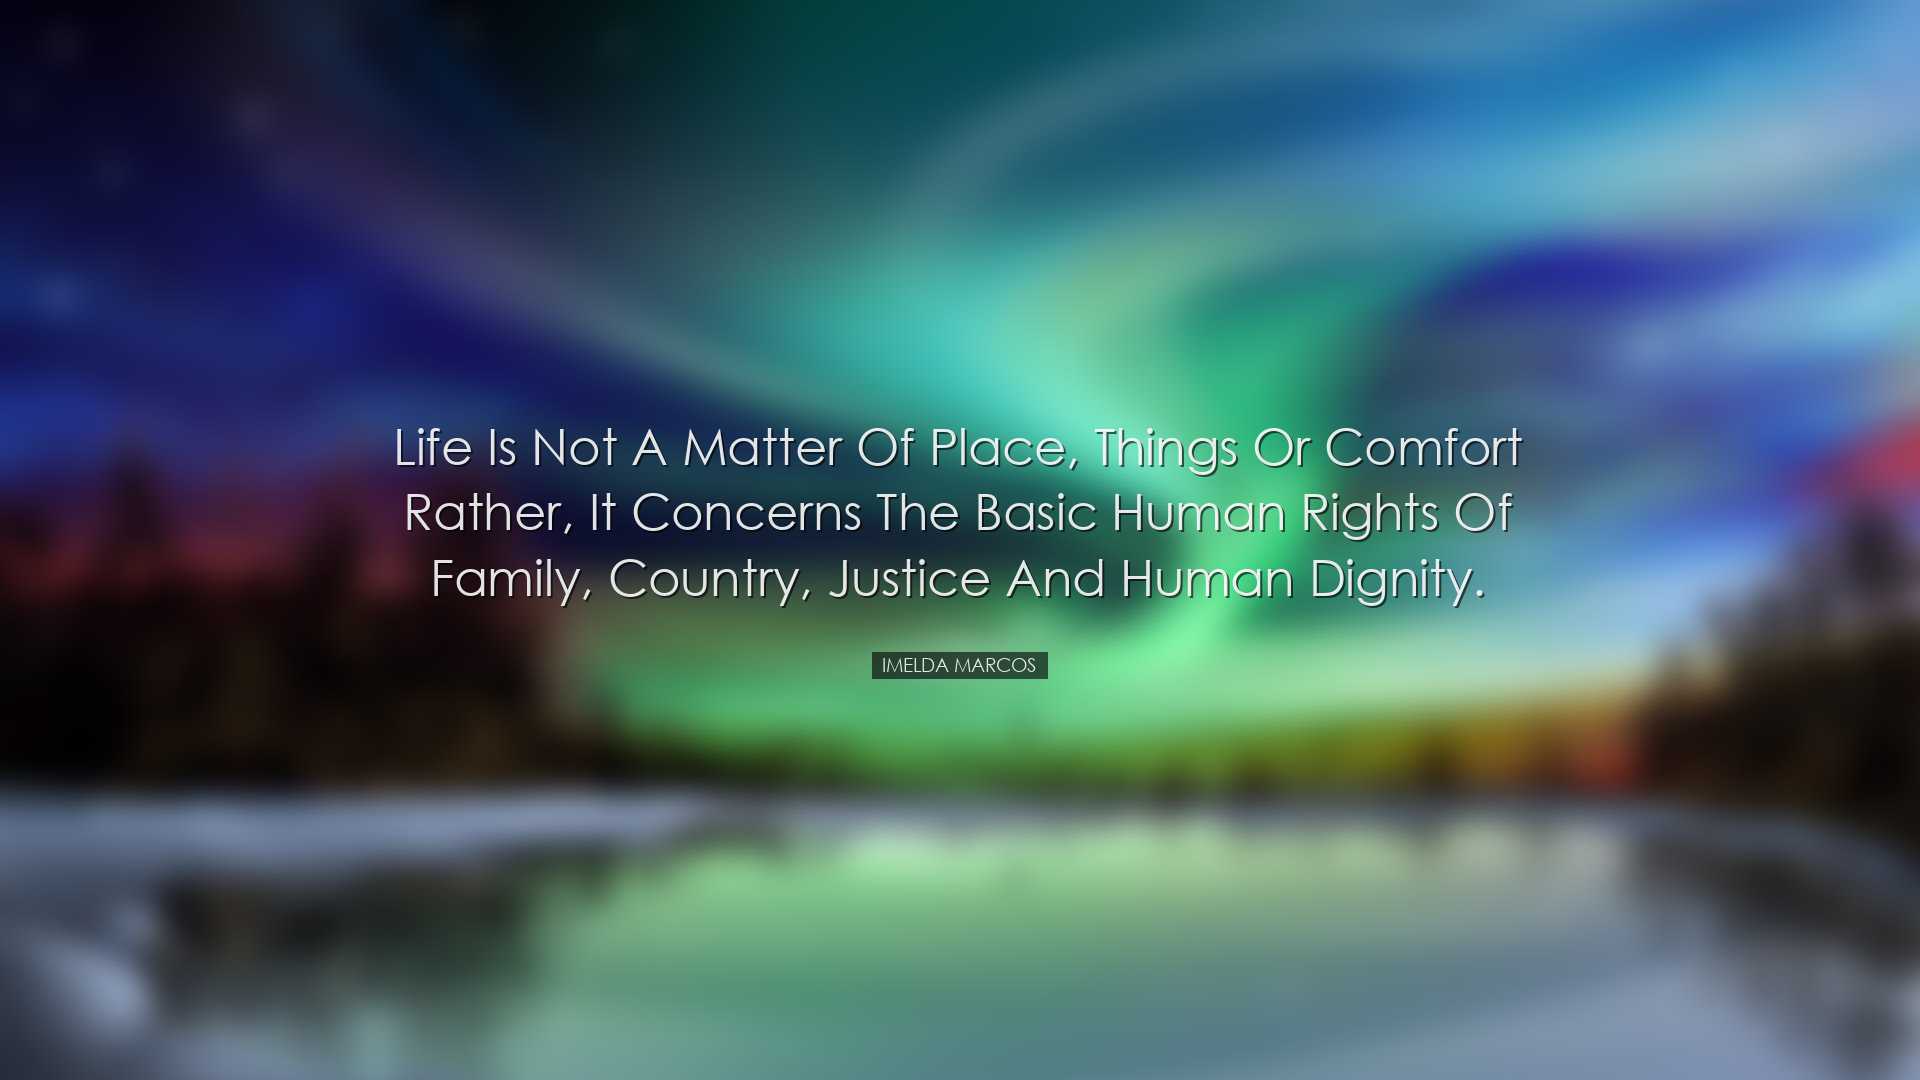 Life is not a matter of place, things or comfort rather, it concer